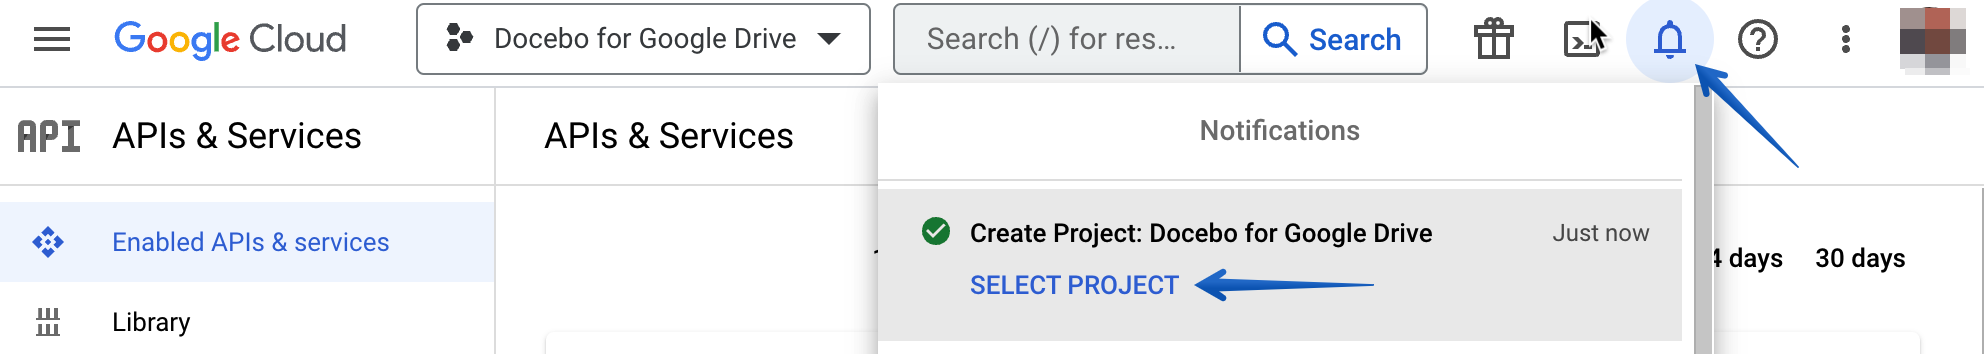 Selecting the project in the notification drop-down list